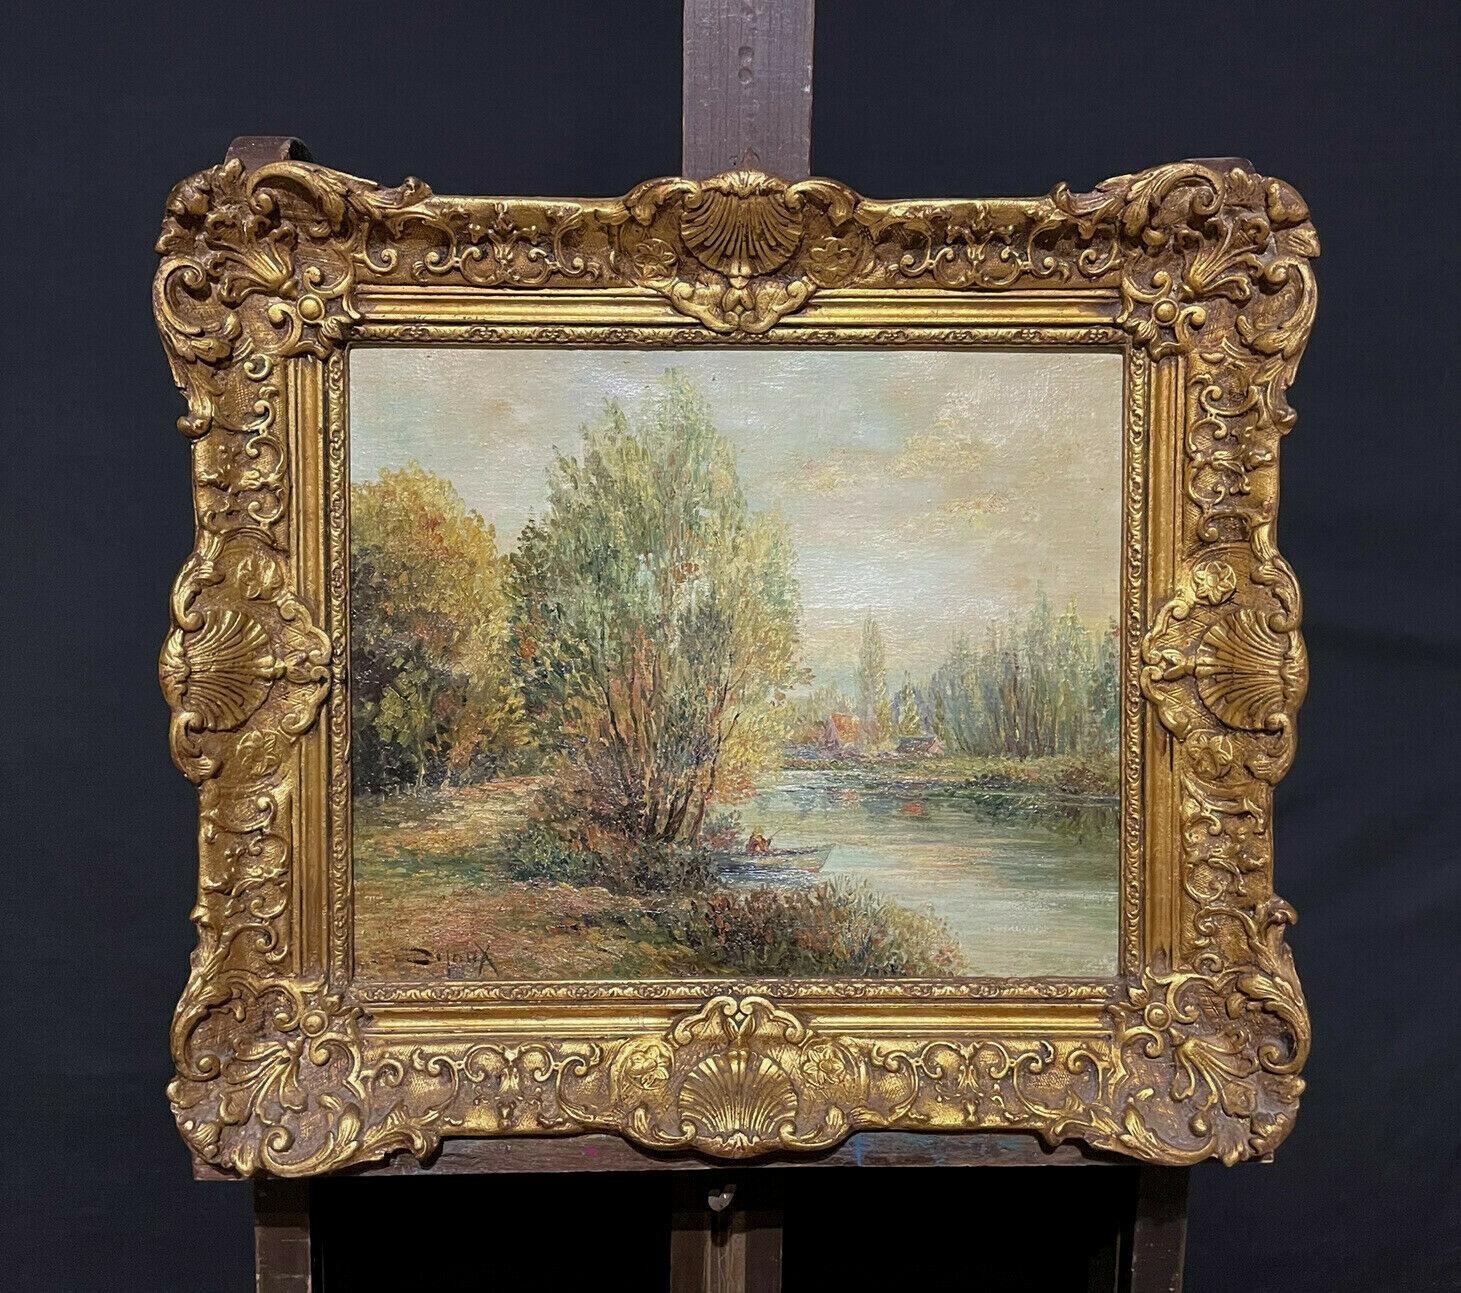 ANTIQUE FRENCH IMPRESSIONIST SIGNED OIL - FIGURE IN BOAT ON RIVER LANDSCAPE - Painting by Unknown